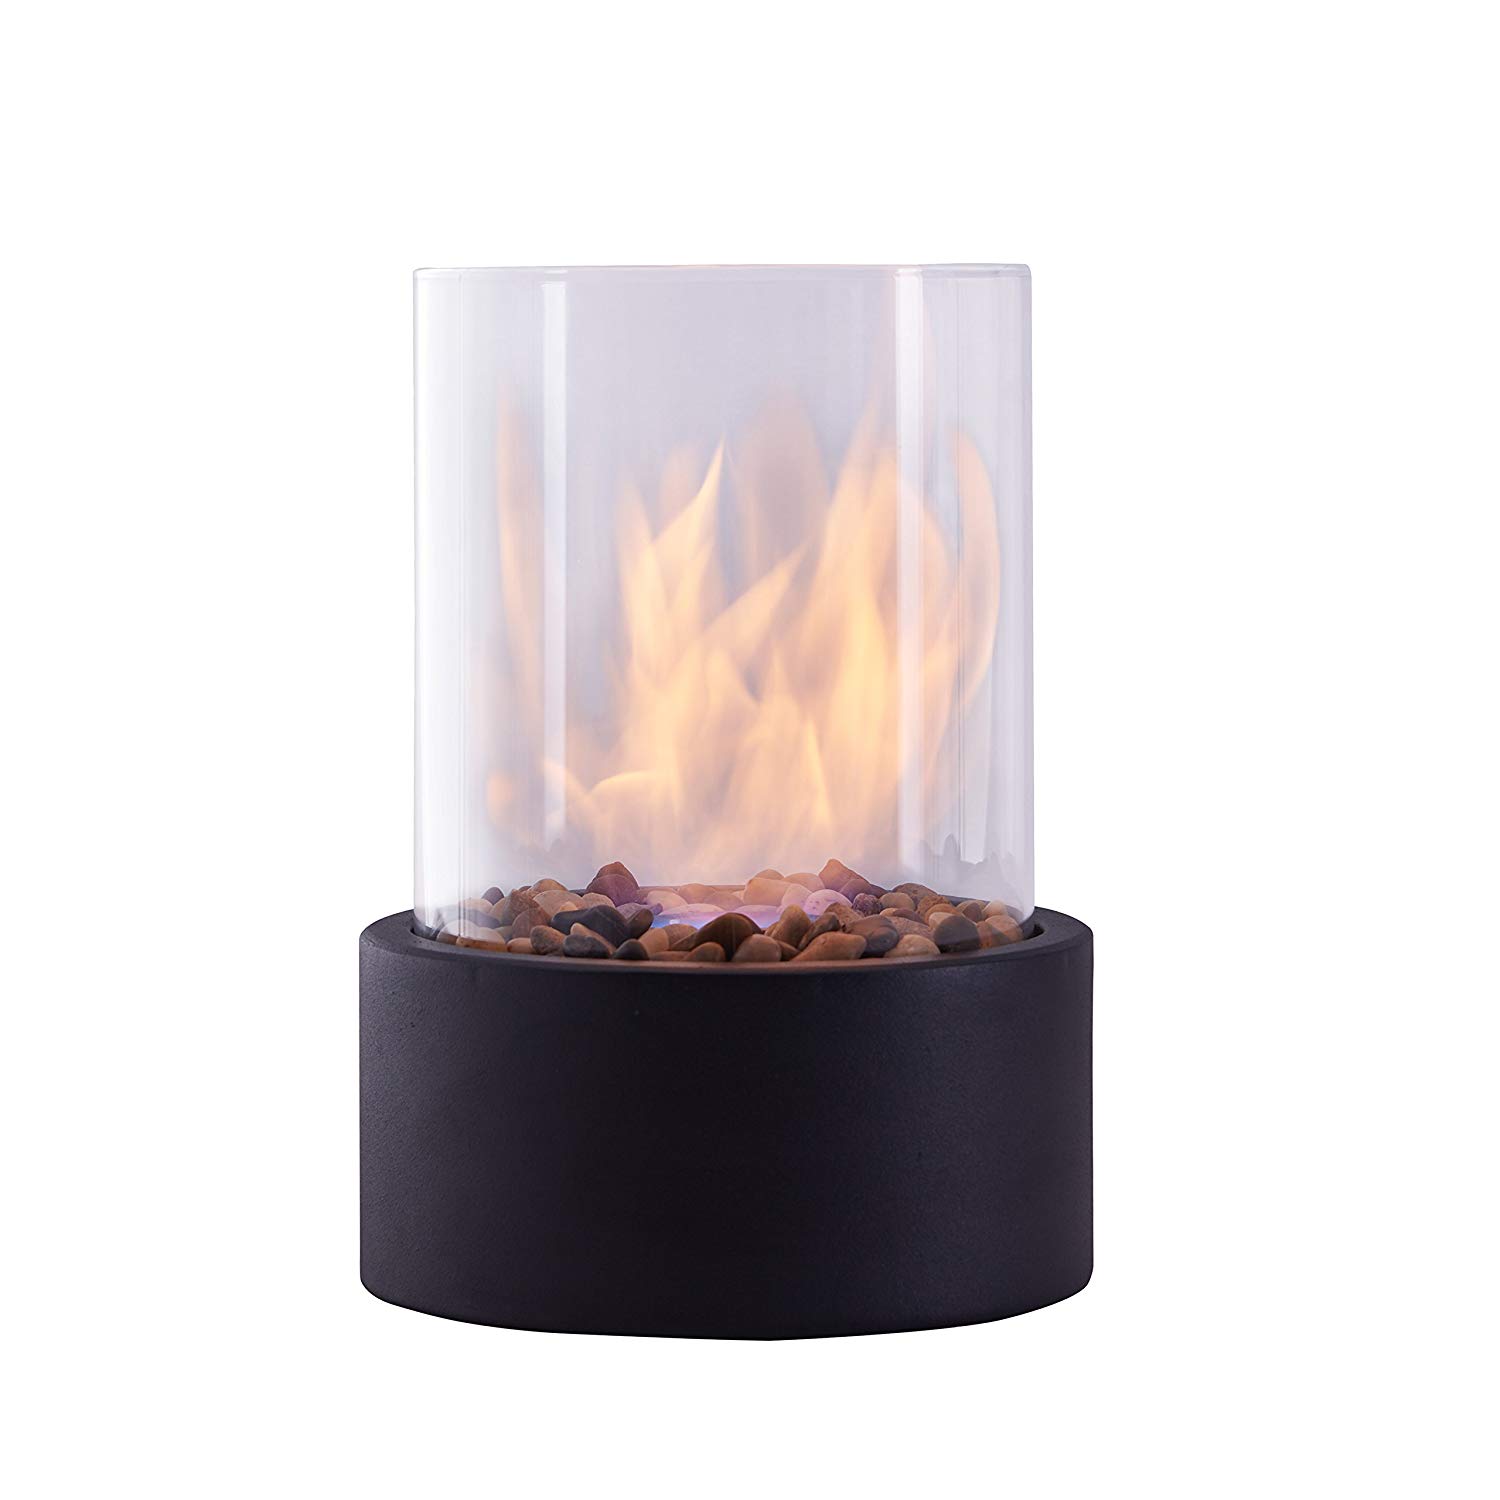 Bio Ethanol Fireplace Fuel Near Me Fresh Danya B Indoor Outdoor Portable Tabletop Fire Pit – Clean Burning Bio Ethanol Ventless Fireplace Small